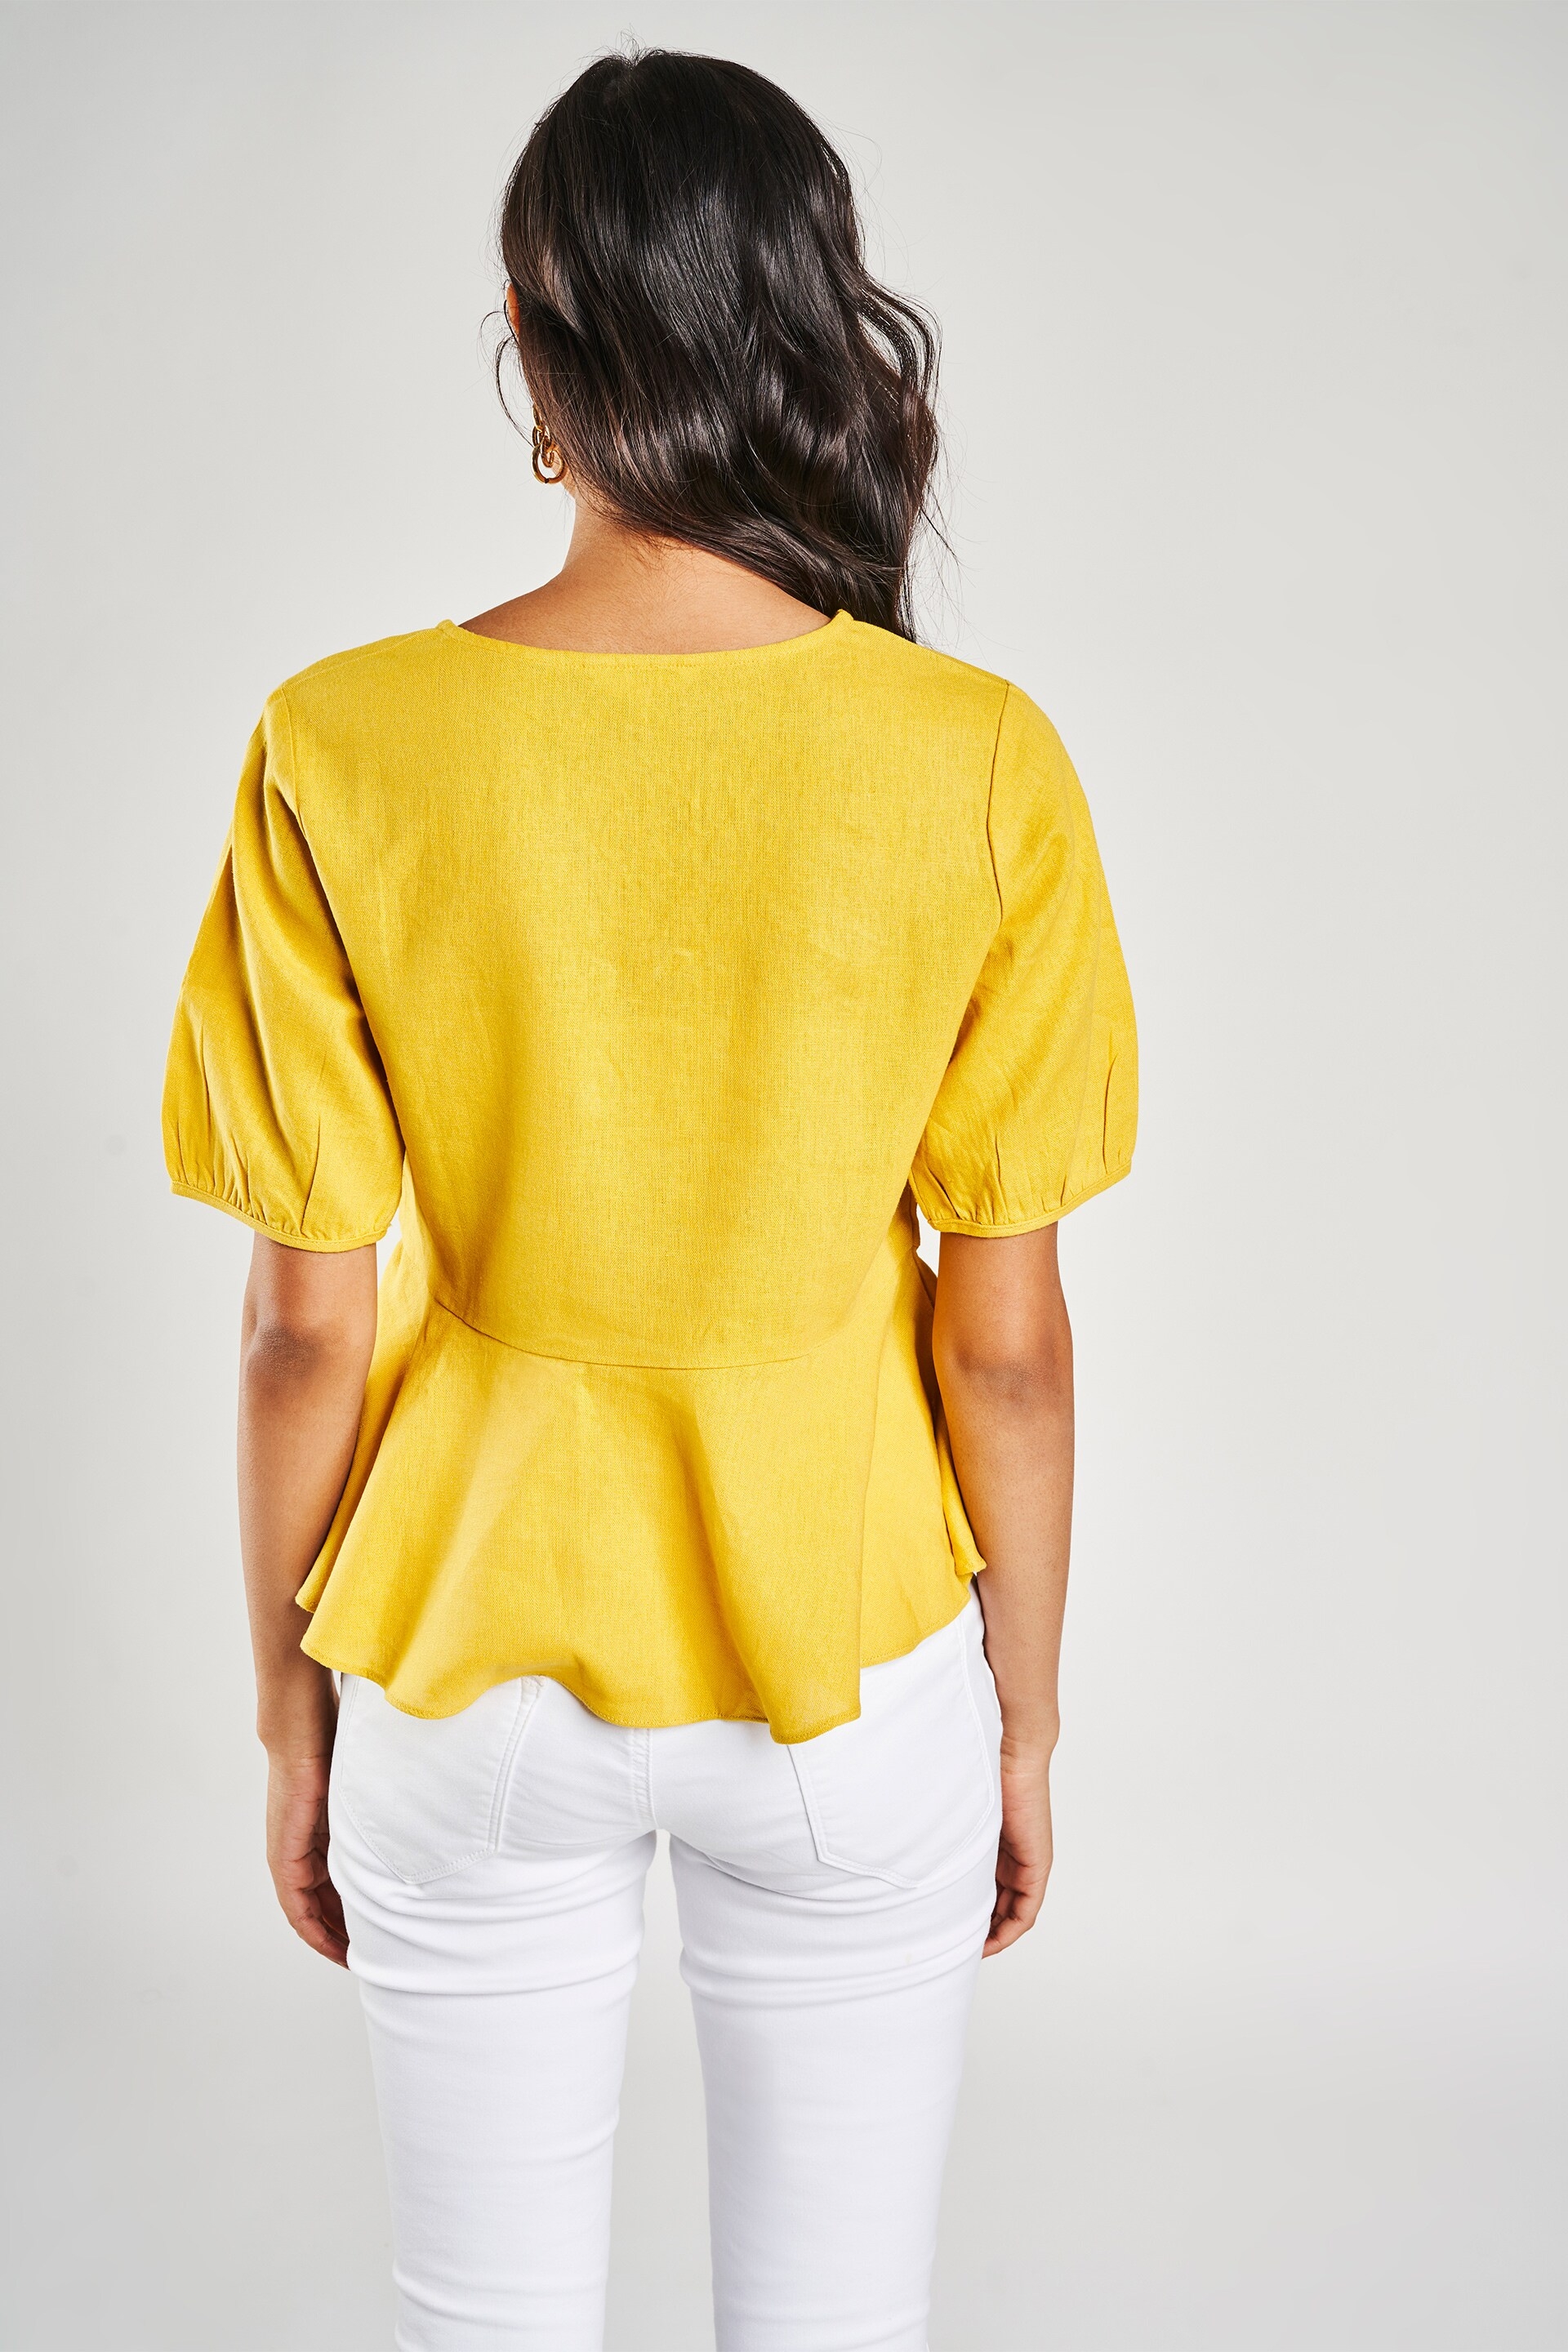 AND | AND YELLOW TOP 2